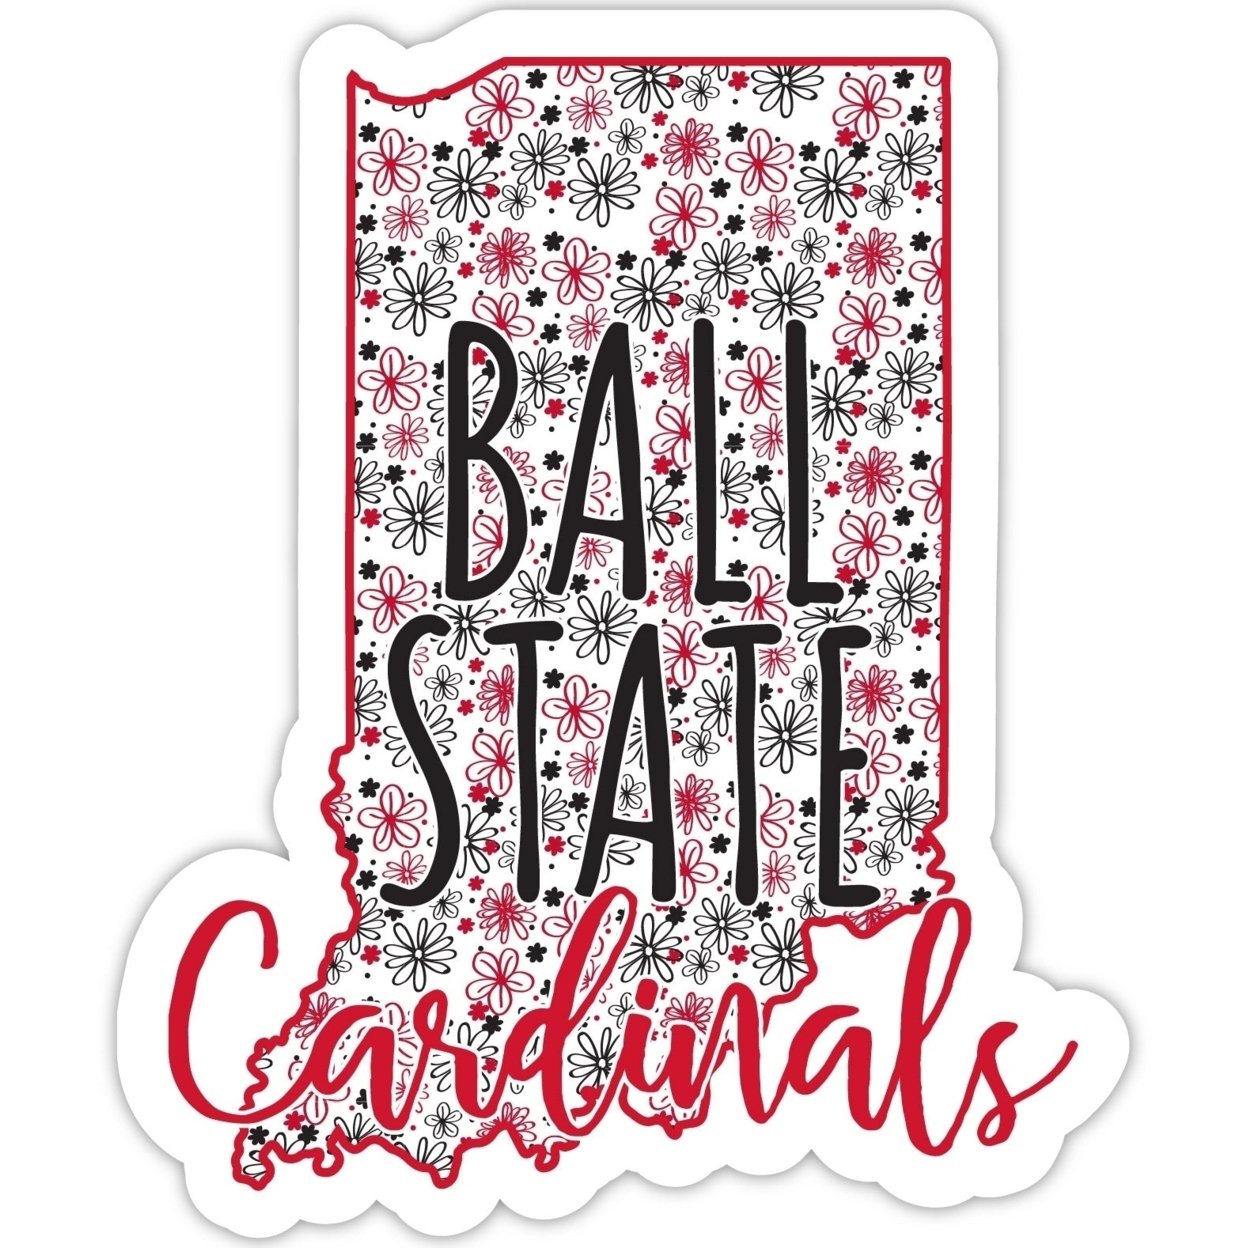 Ball State University Floral State Die Cut Decal 4-Inch